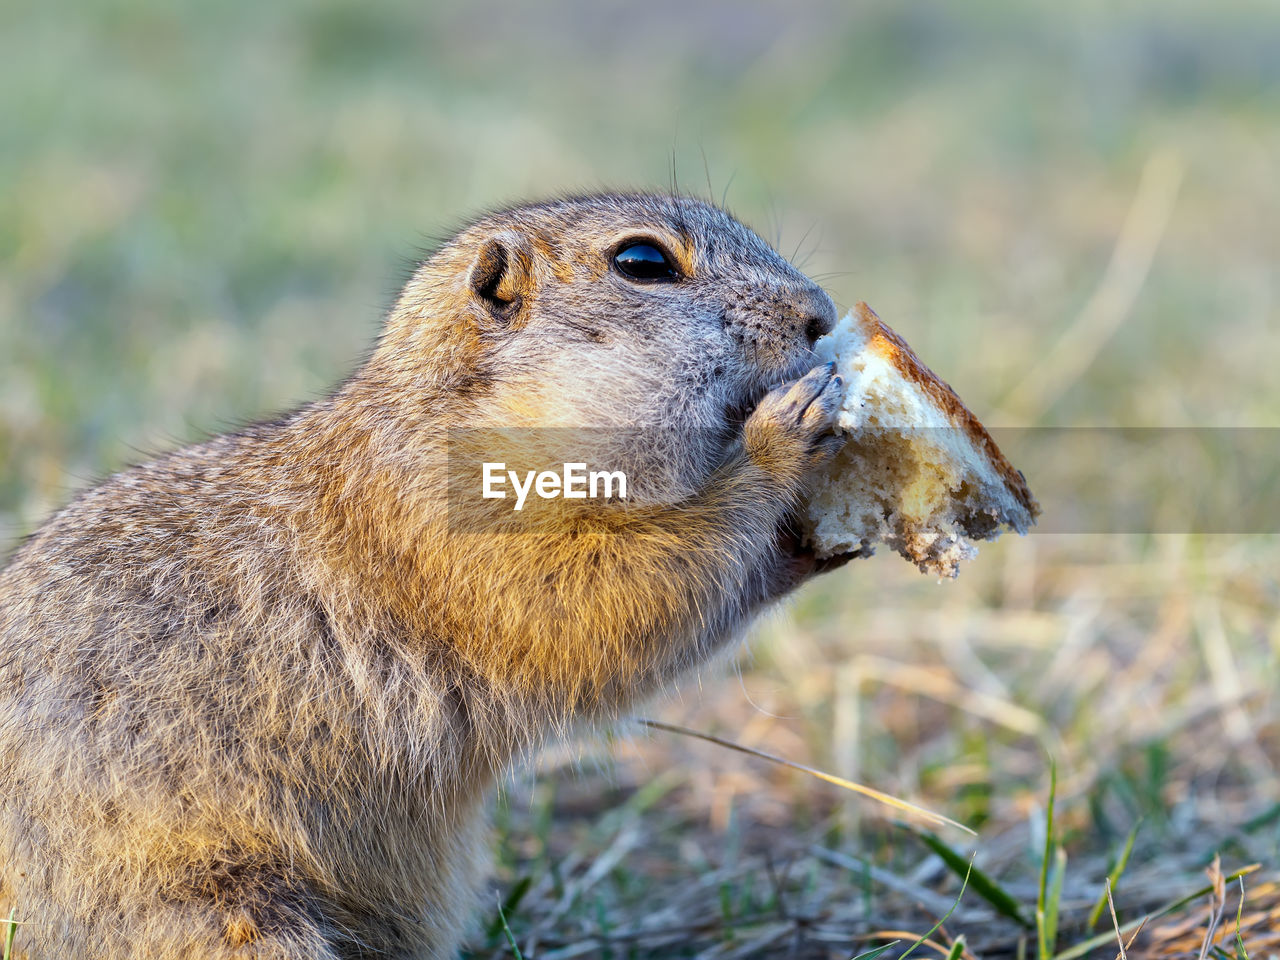 animal, animal themes, animal wildlife, one animal, wildlife, mammal, squirrel, whiskers, prairie dog, rodent, side view, no people, nature, profile view, outdoors, grass, close-up, portrait, animal body part, focus on foreground, eating, day